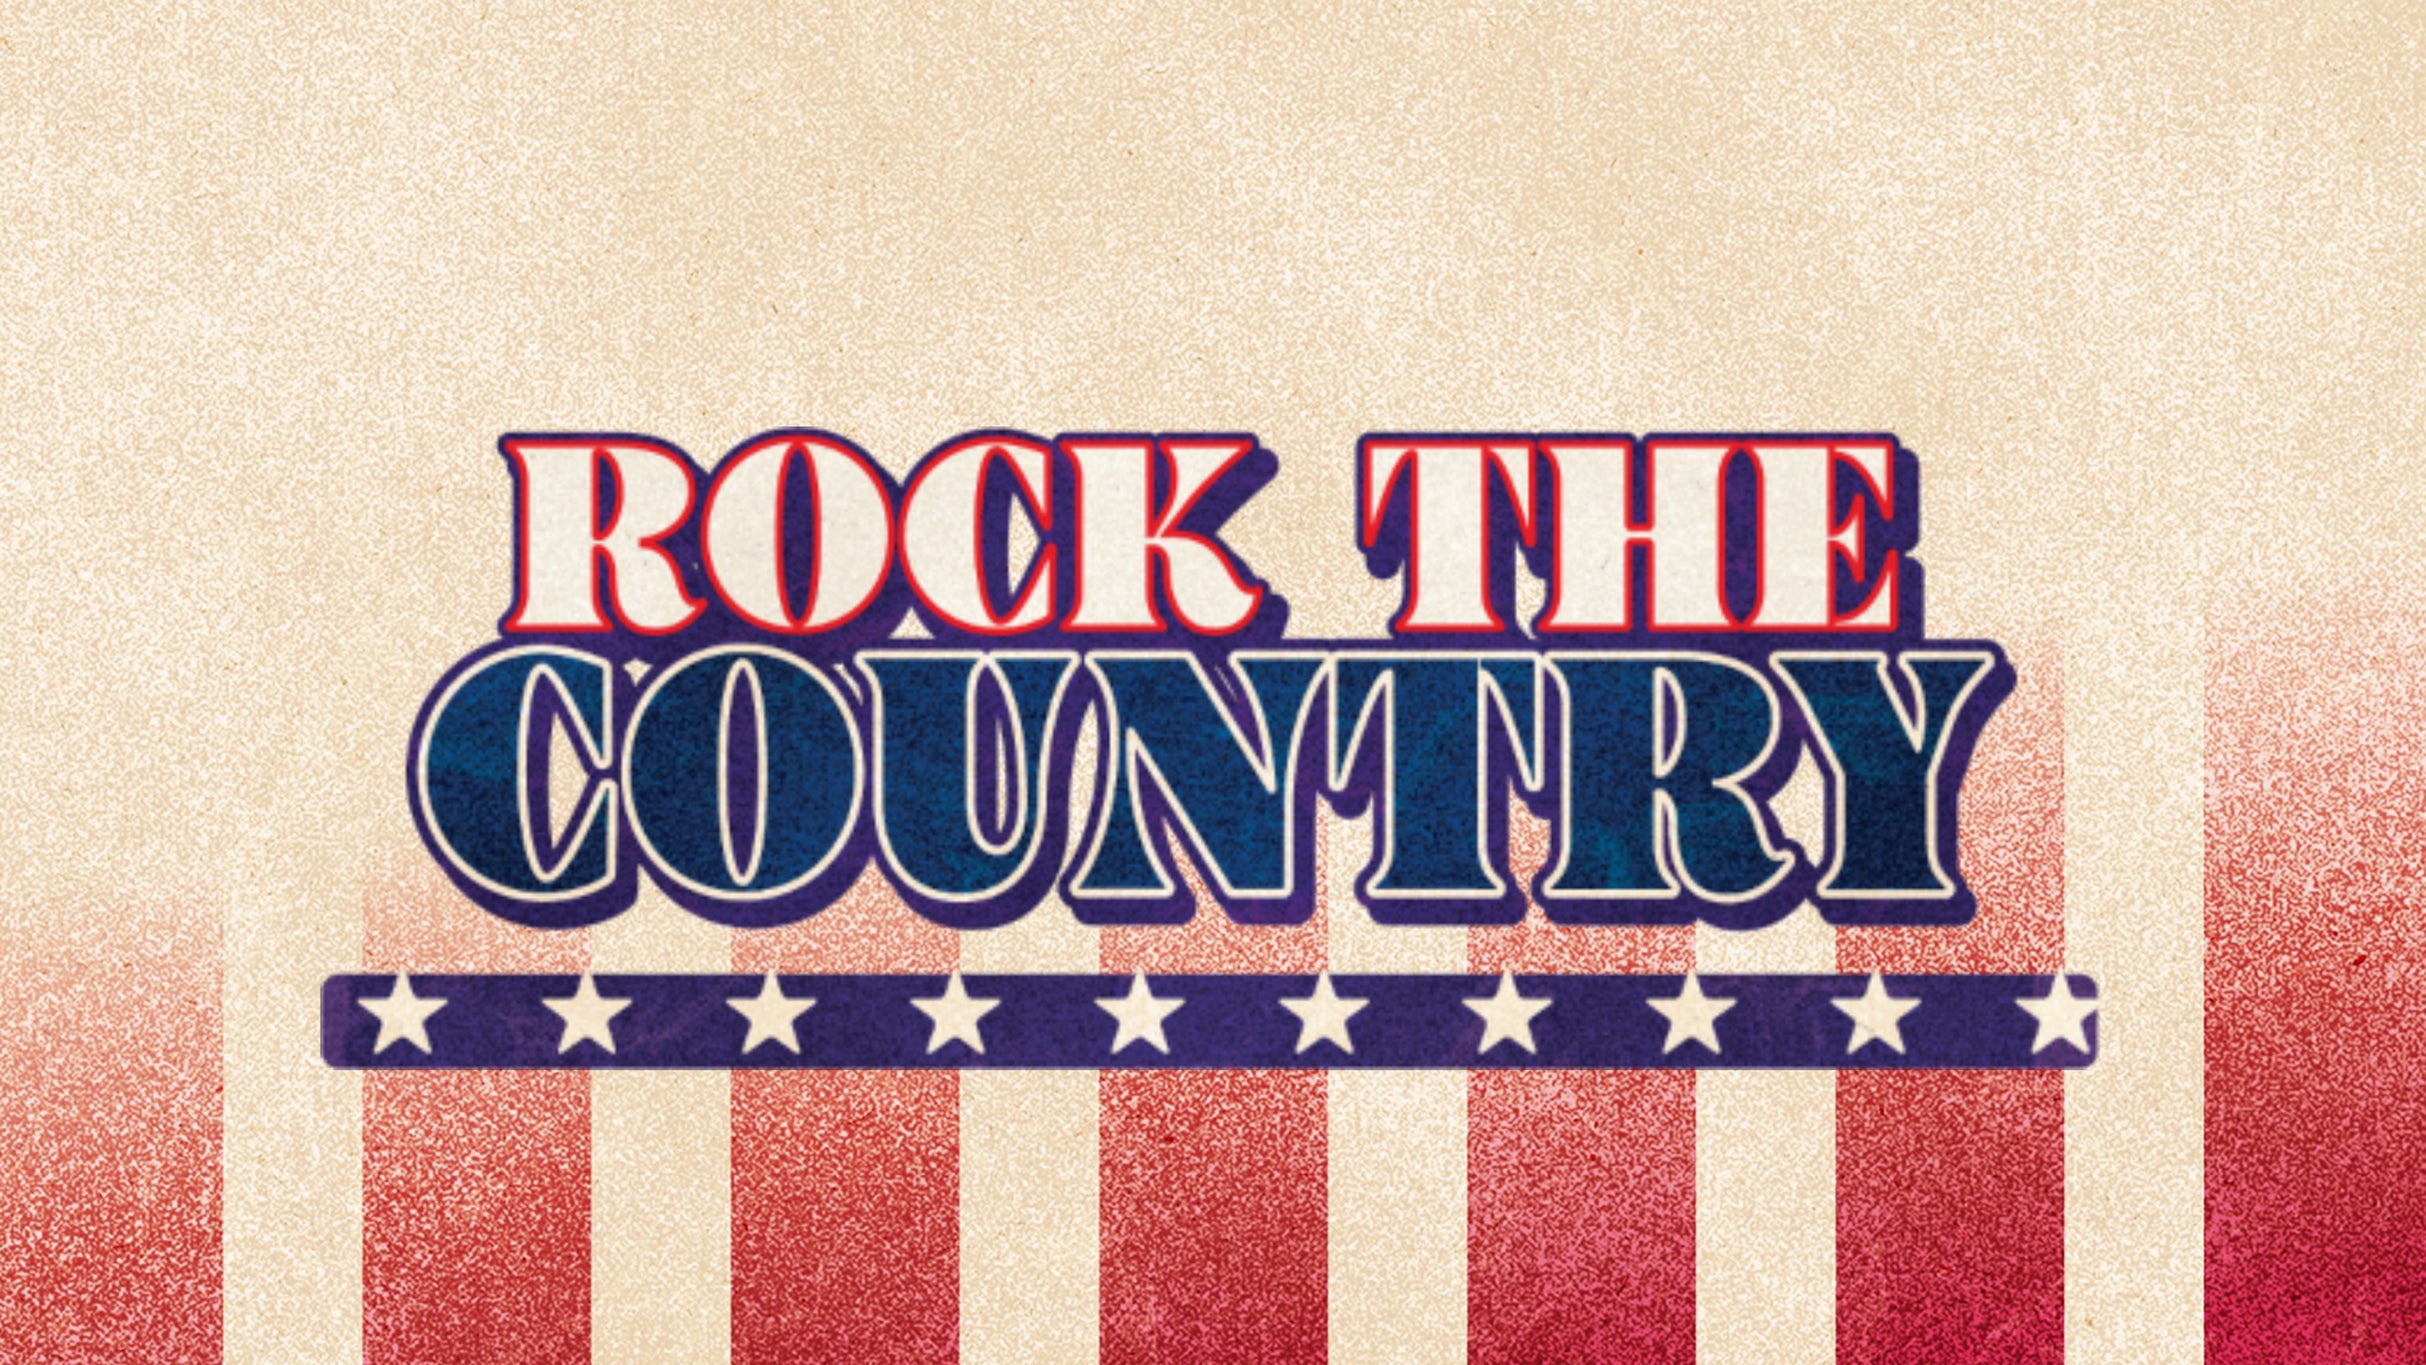 Rock The Country - Ashland, KY at Boyd County Fairgrounds